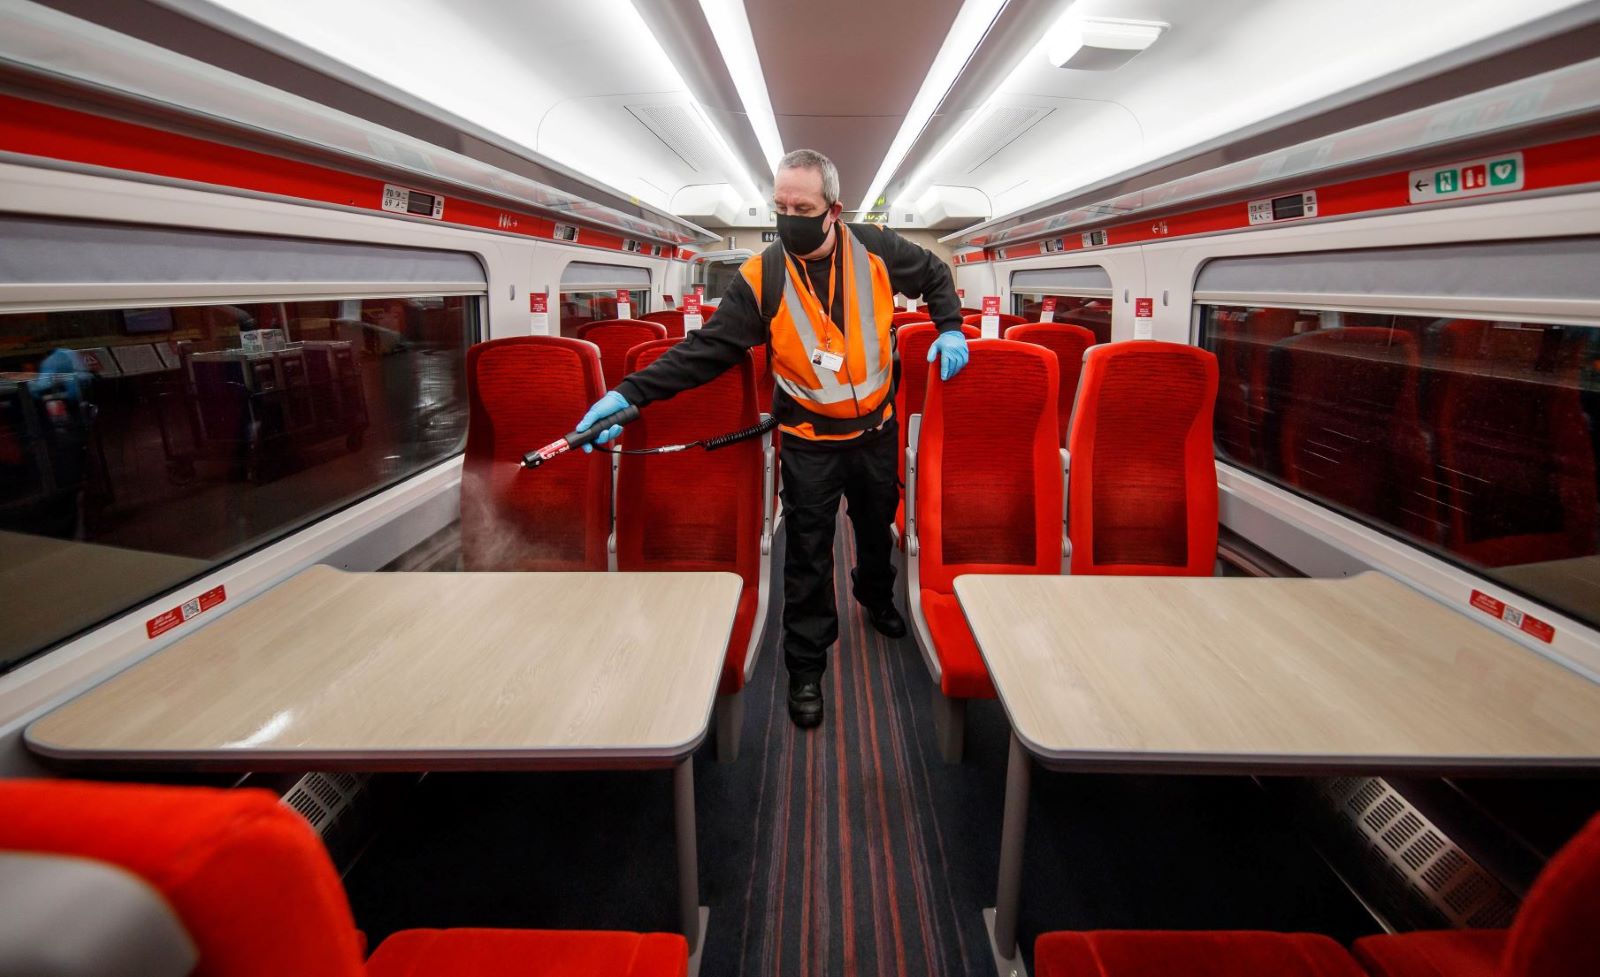 Cleaners Clock Up Half A Million Hours Working Day-And-Night To Ensure LNER Customers Can Travel With Confidence